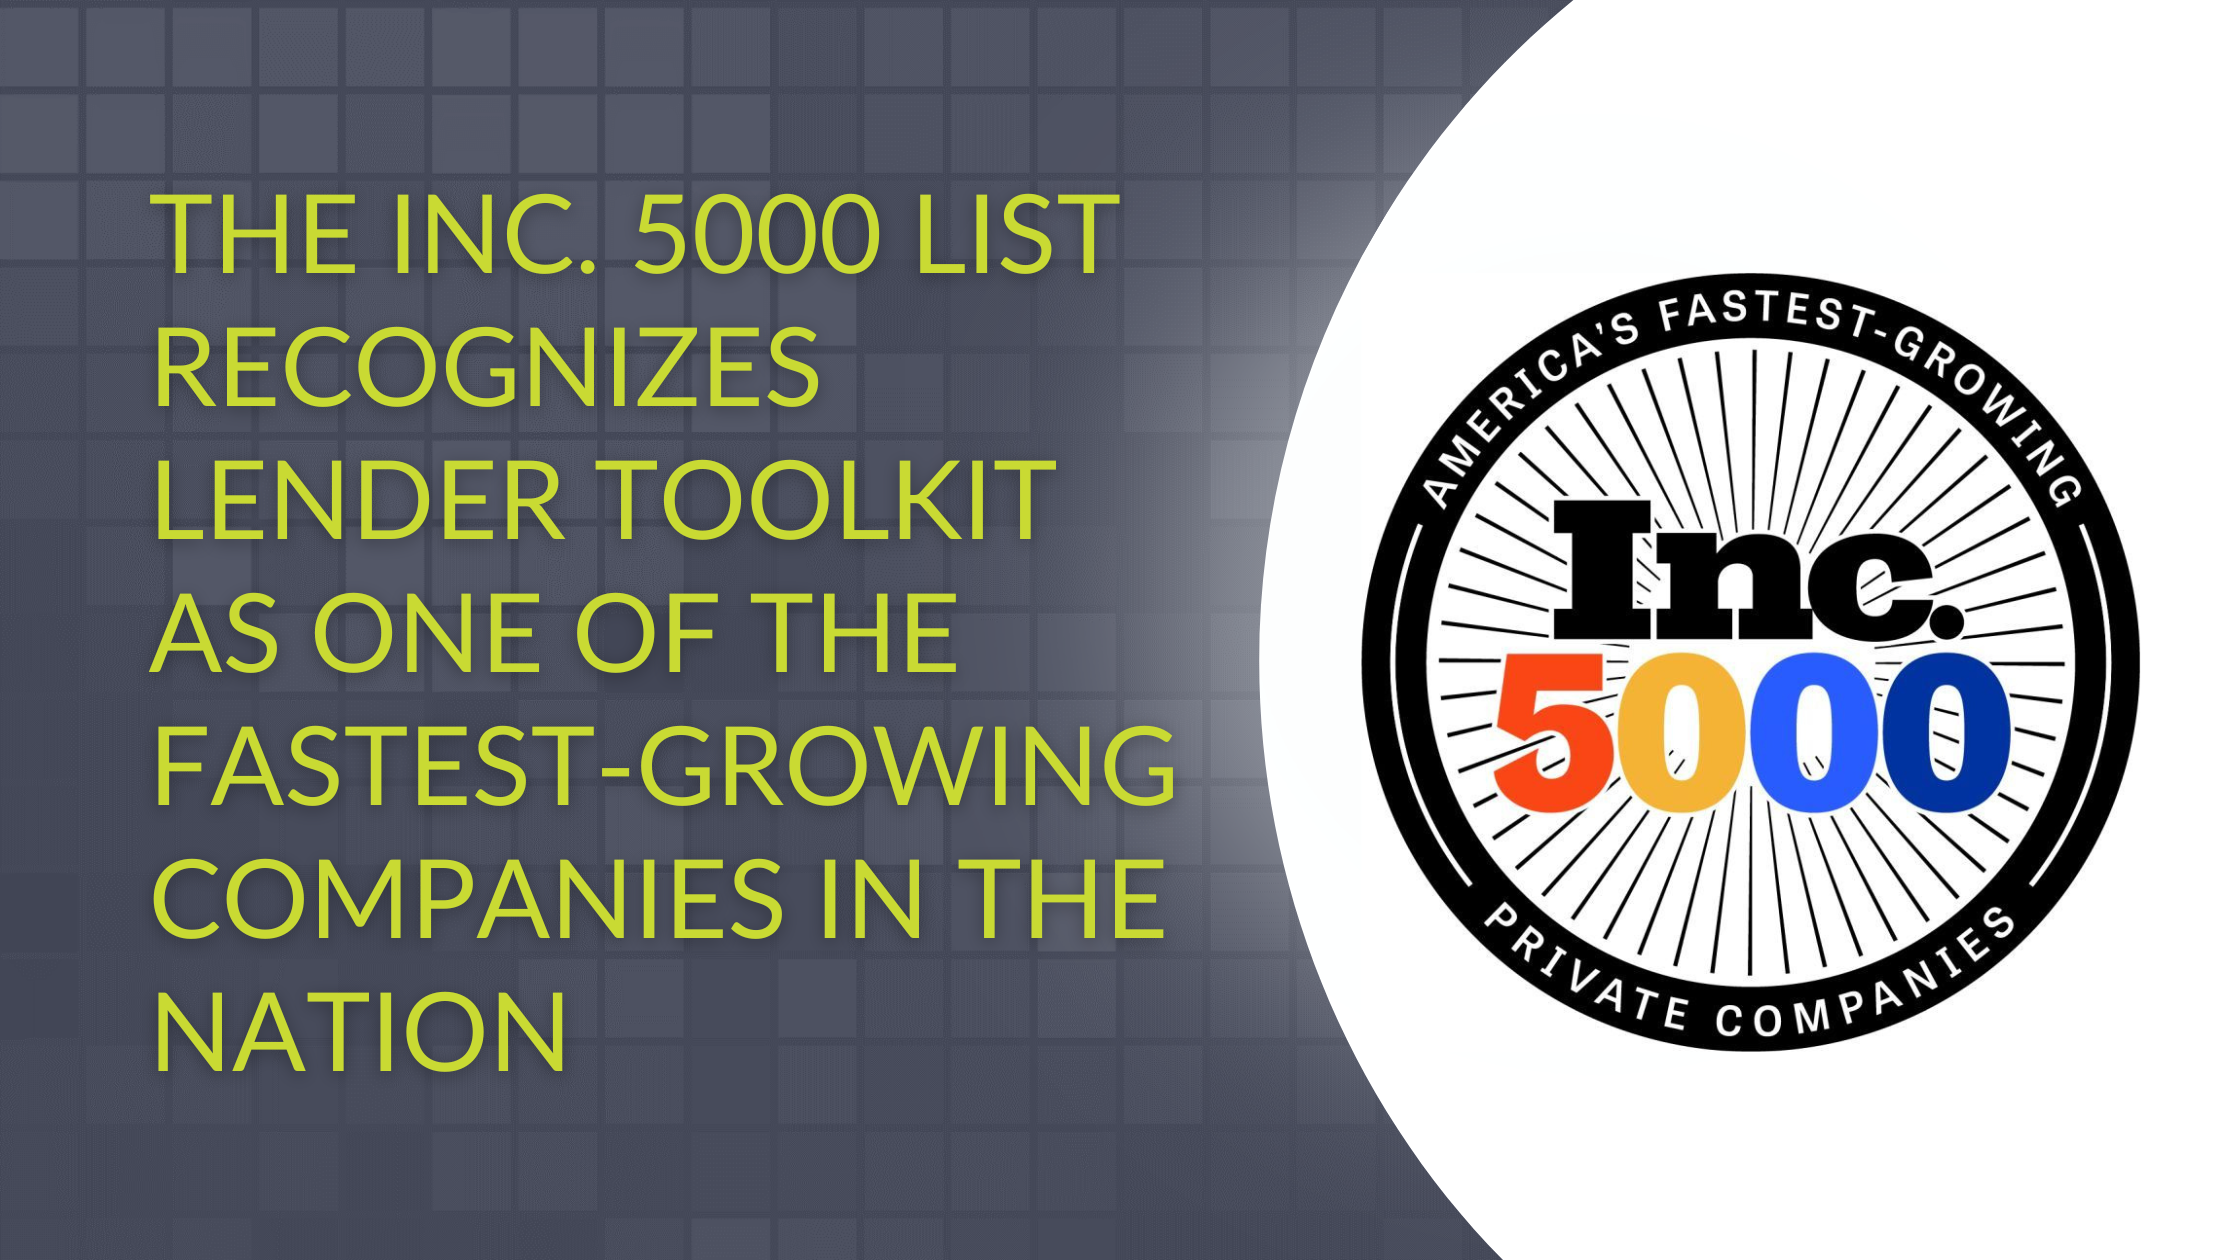 The Inc. 5000 List Recognizes Lender Toolkit as One of the Fastest-Growing Companies in the Nation